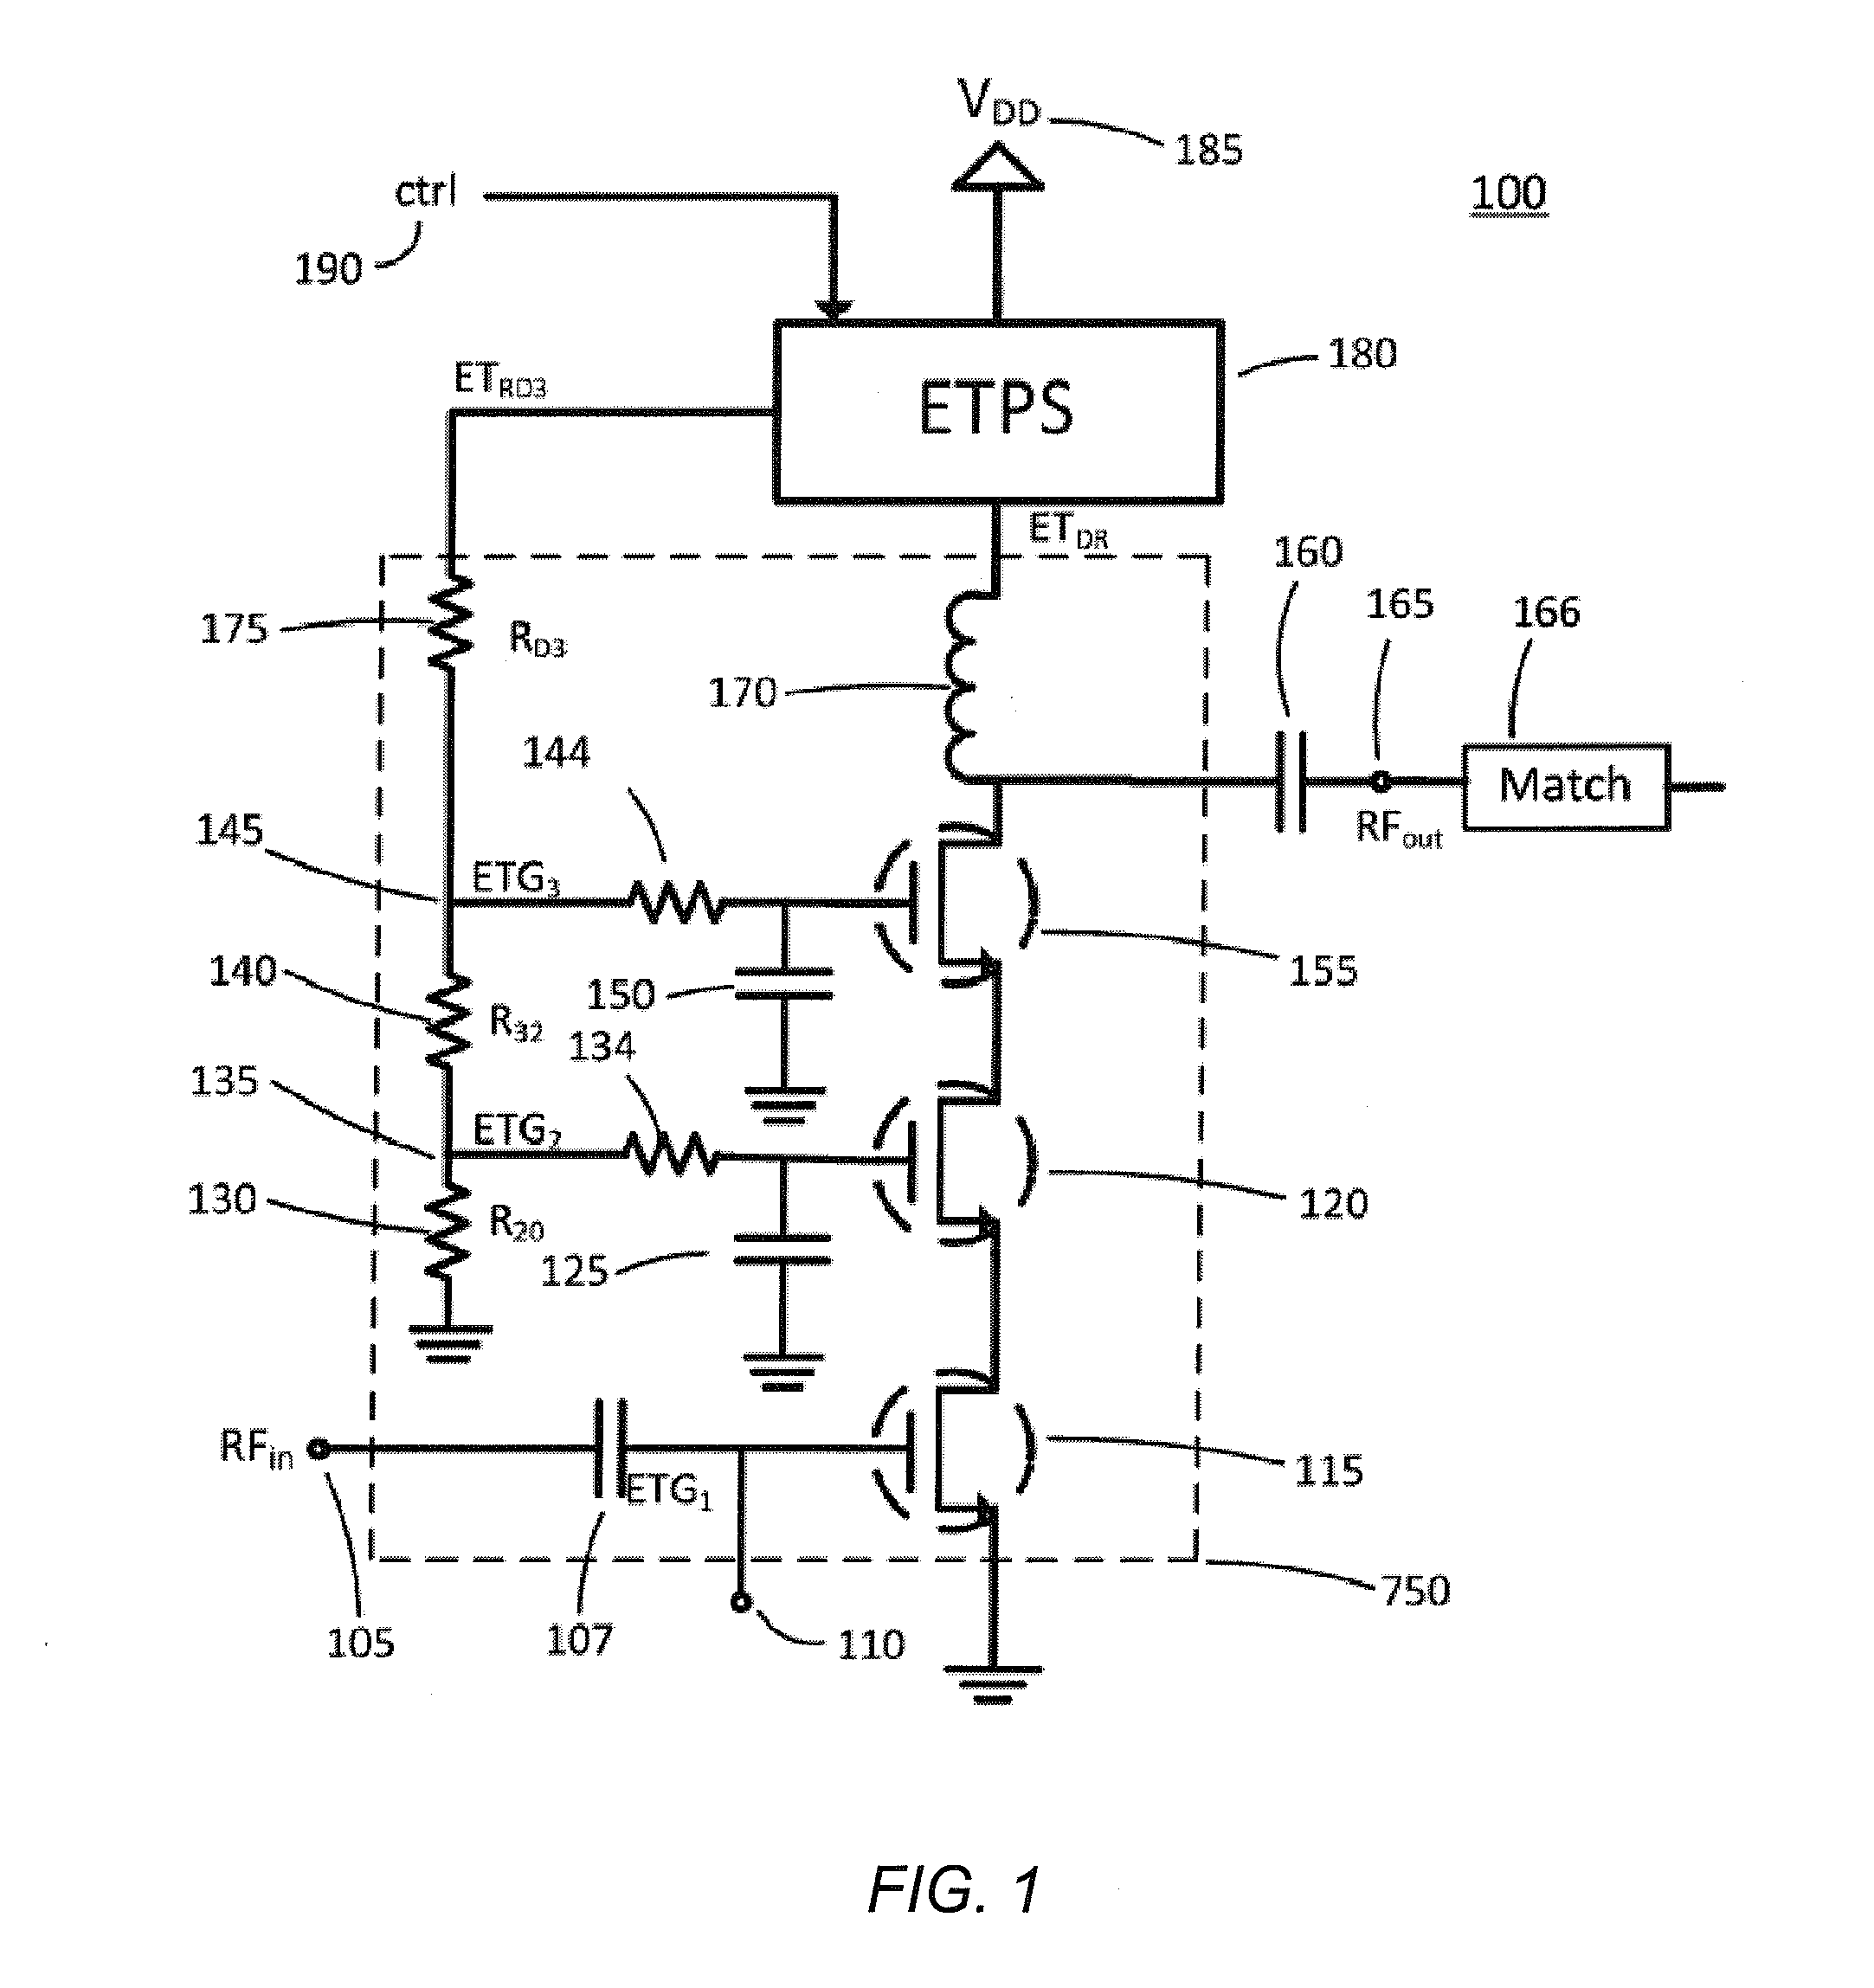 Optimization Methods for Amplifier with Variable Supply Power